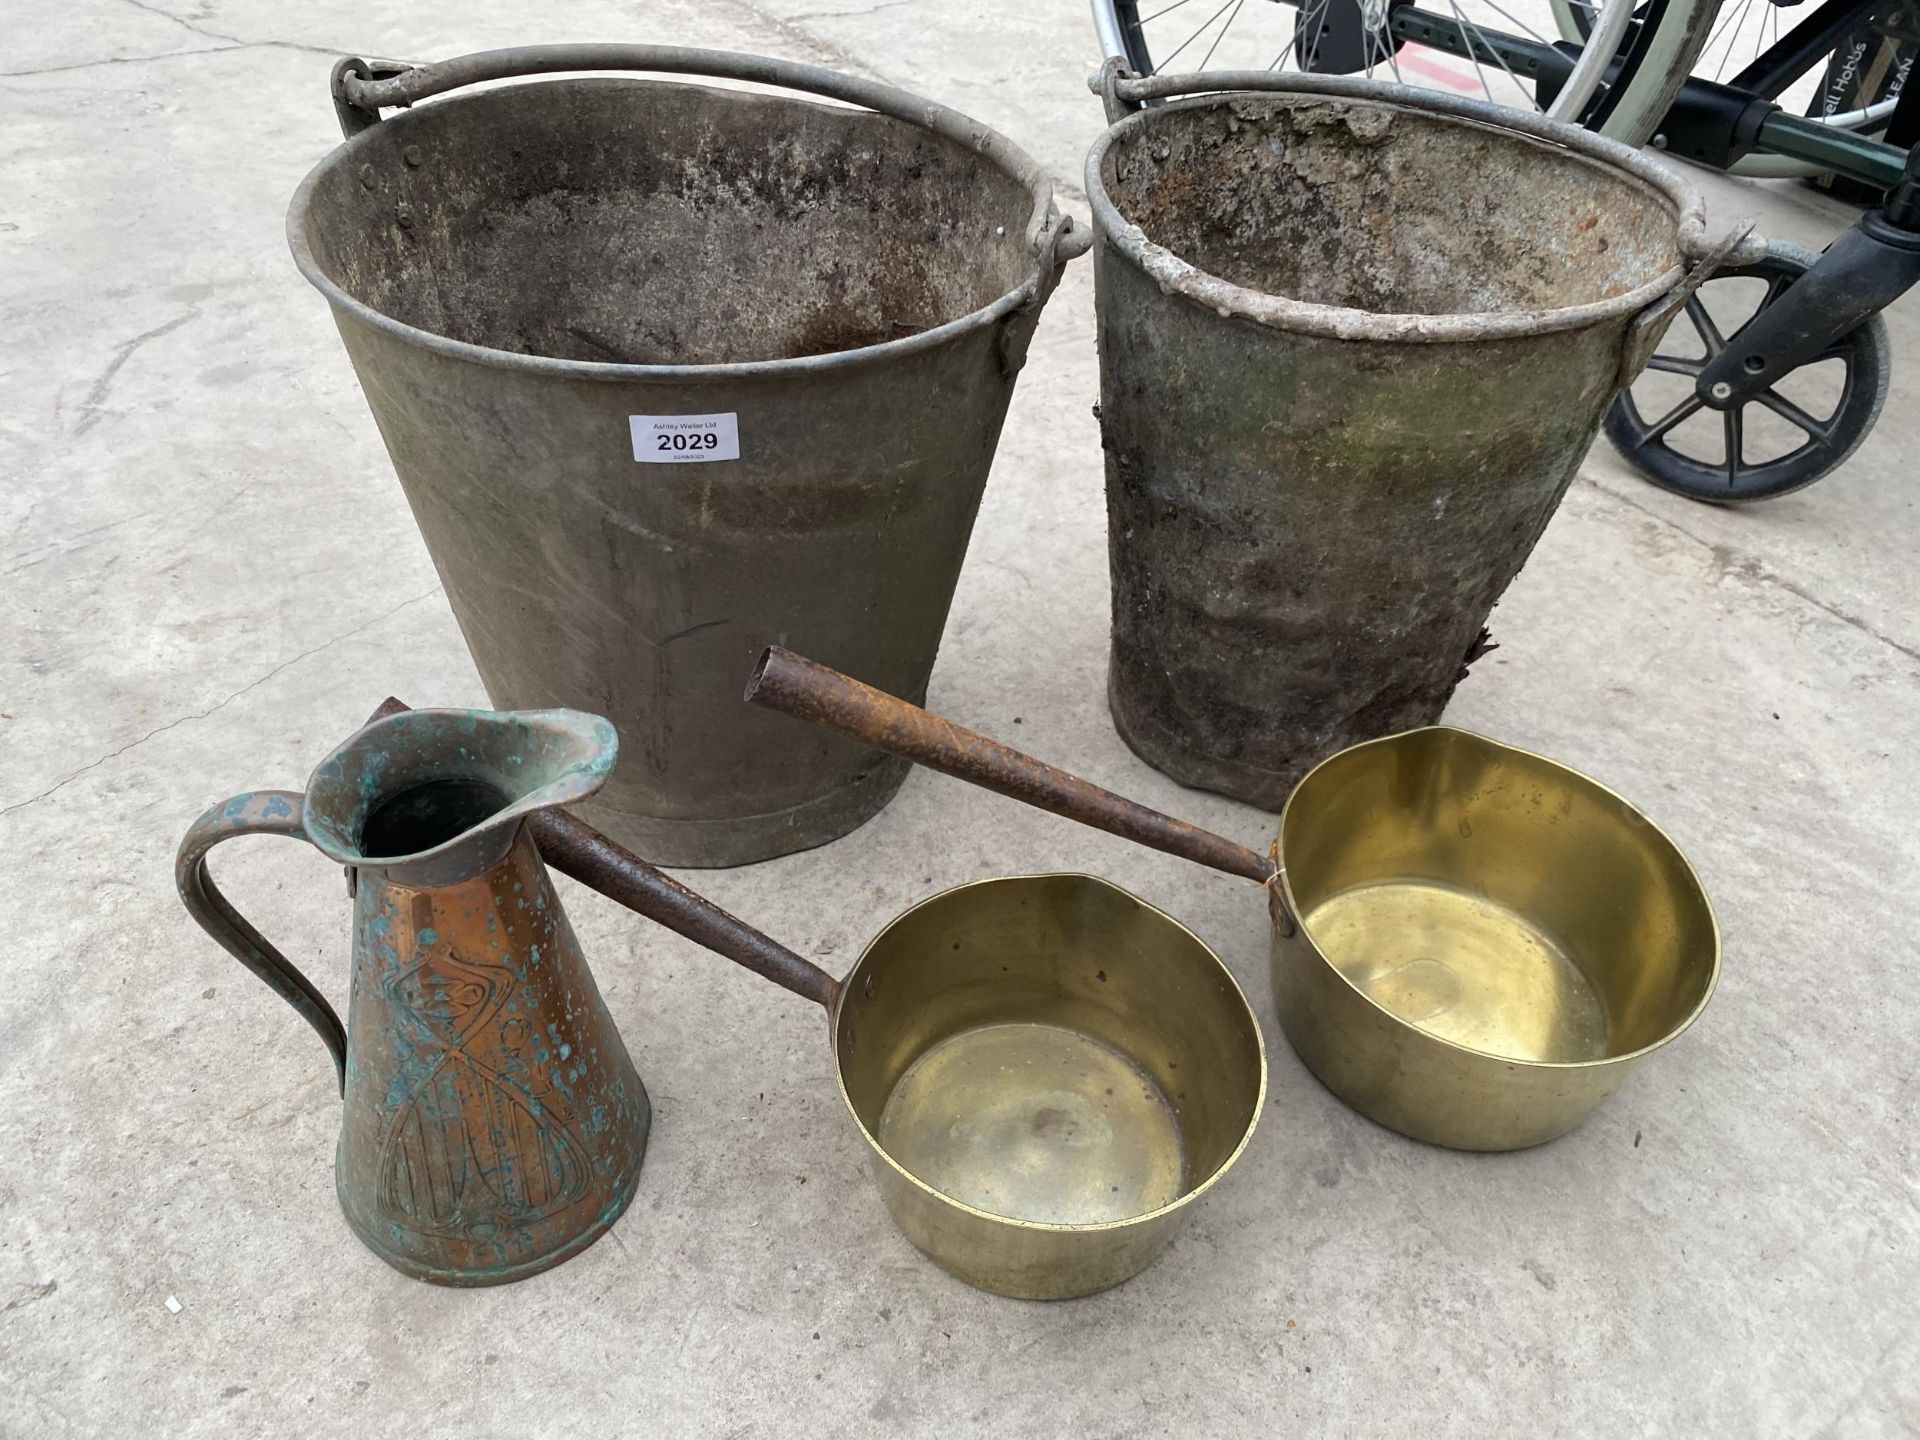 TWO VINTAGE GALVANISED BUCKETS, TWO BRASS PANS AND A COPPER JUG ETC - Image 2 of 2